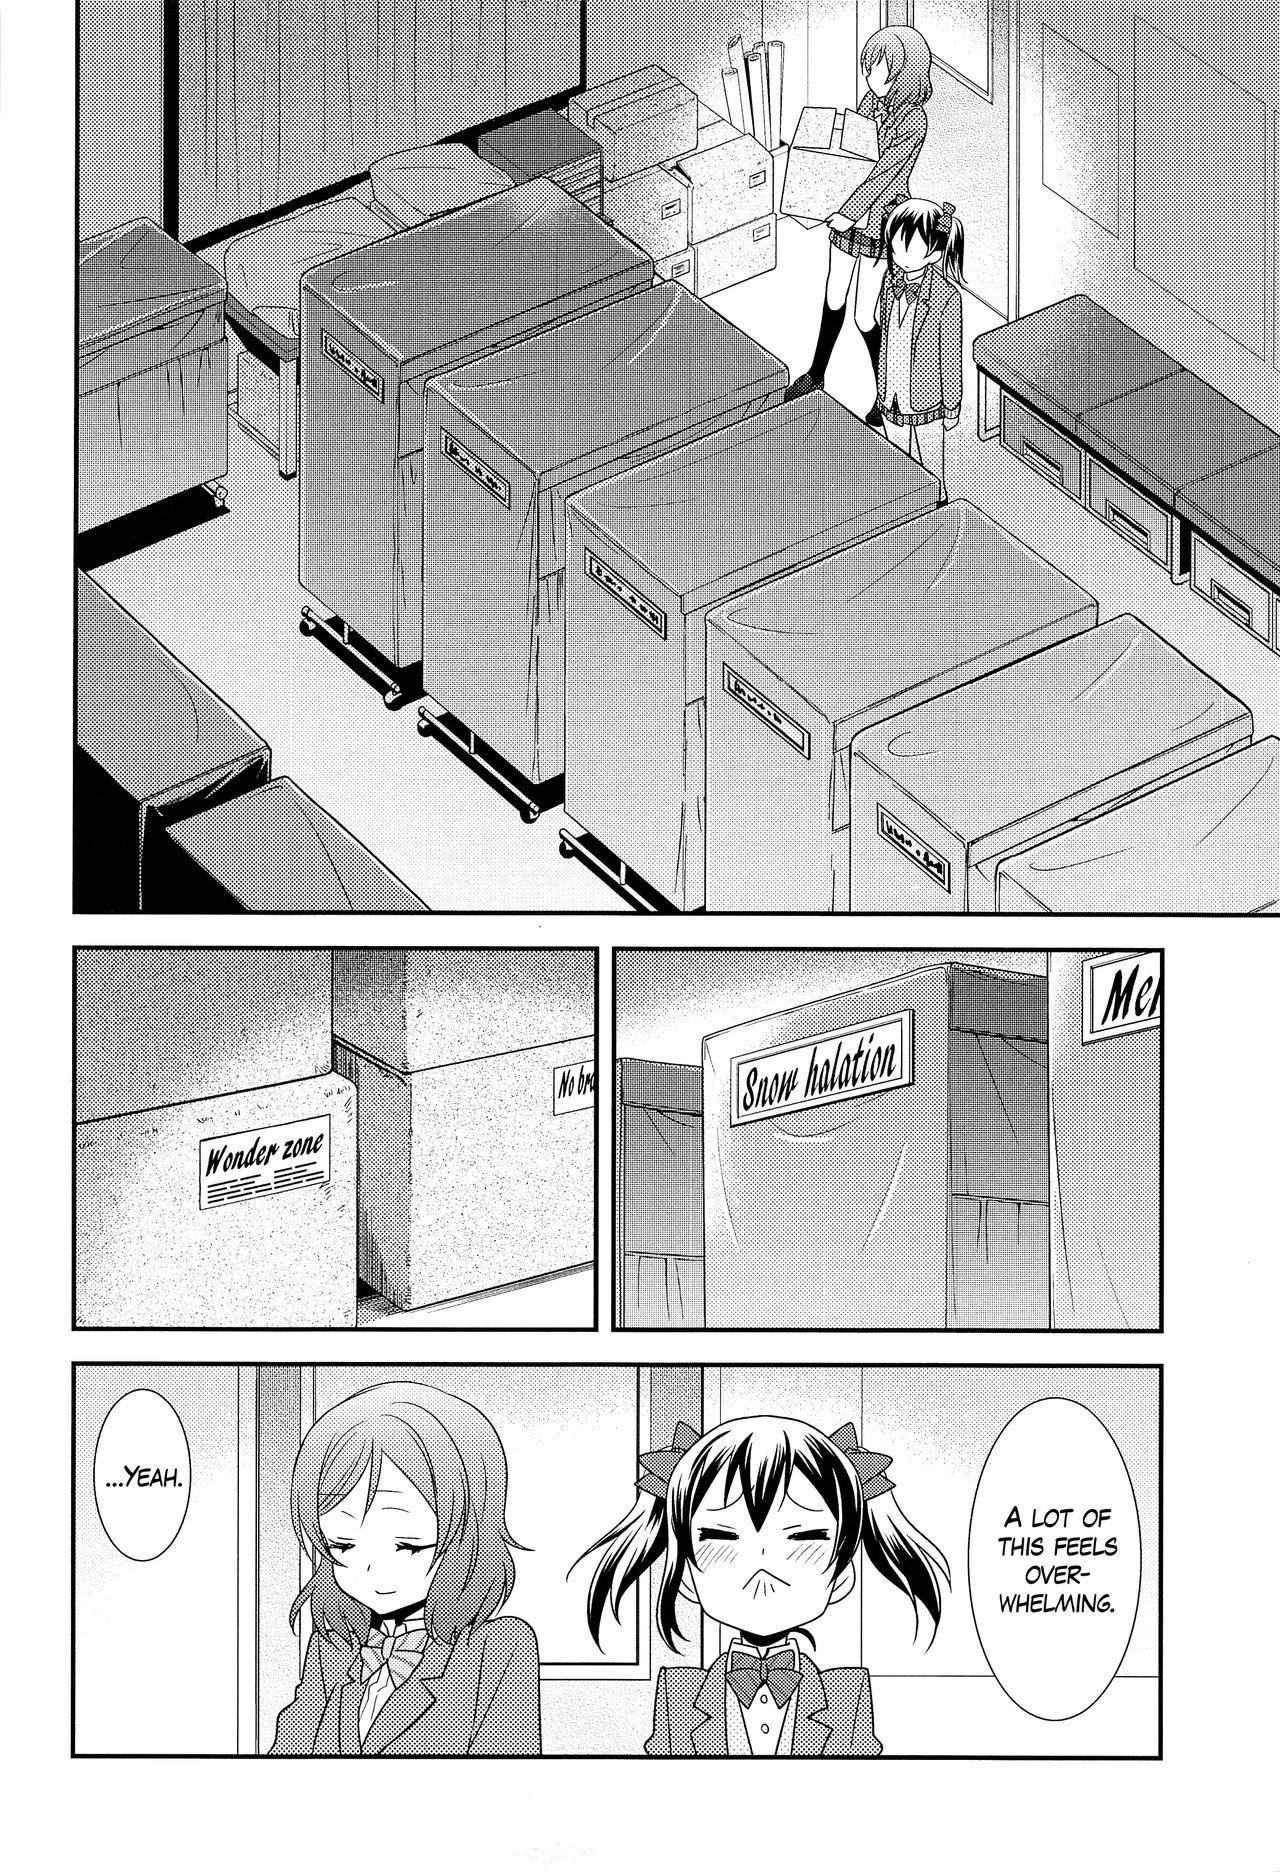 Gayhardcore Bokura no Te ni wa Ai Shika nai. | There’s Nothing but Love In Our Hands. - Love live Lingerie - Page 10